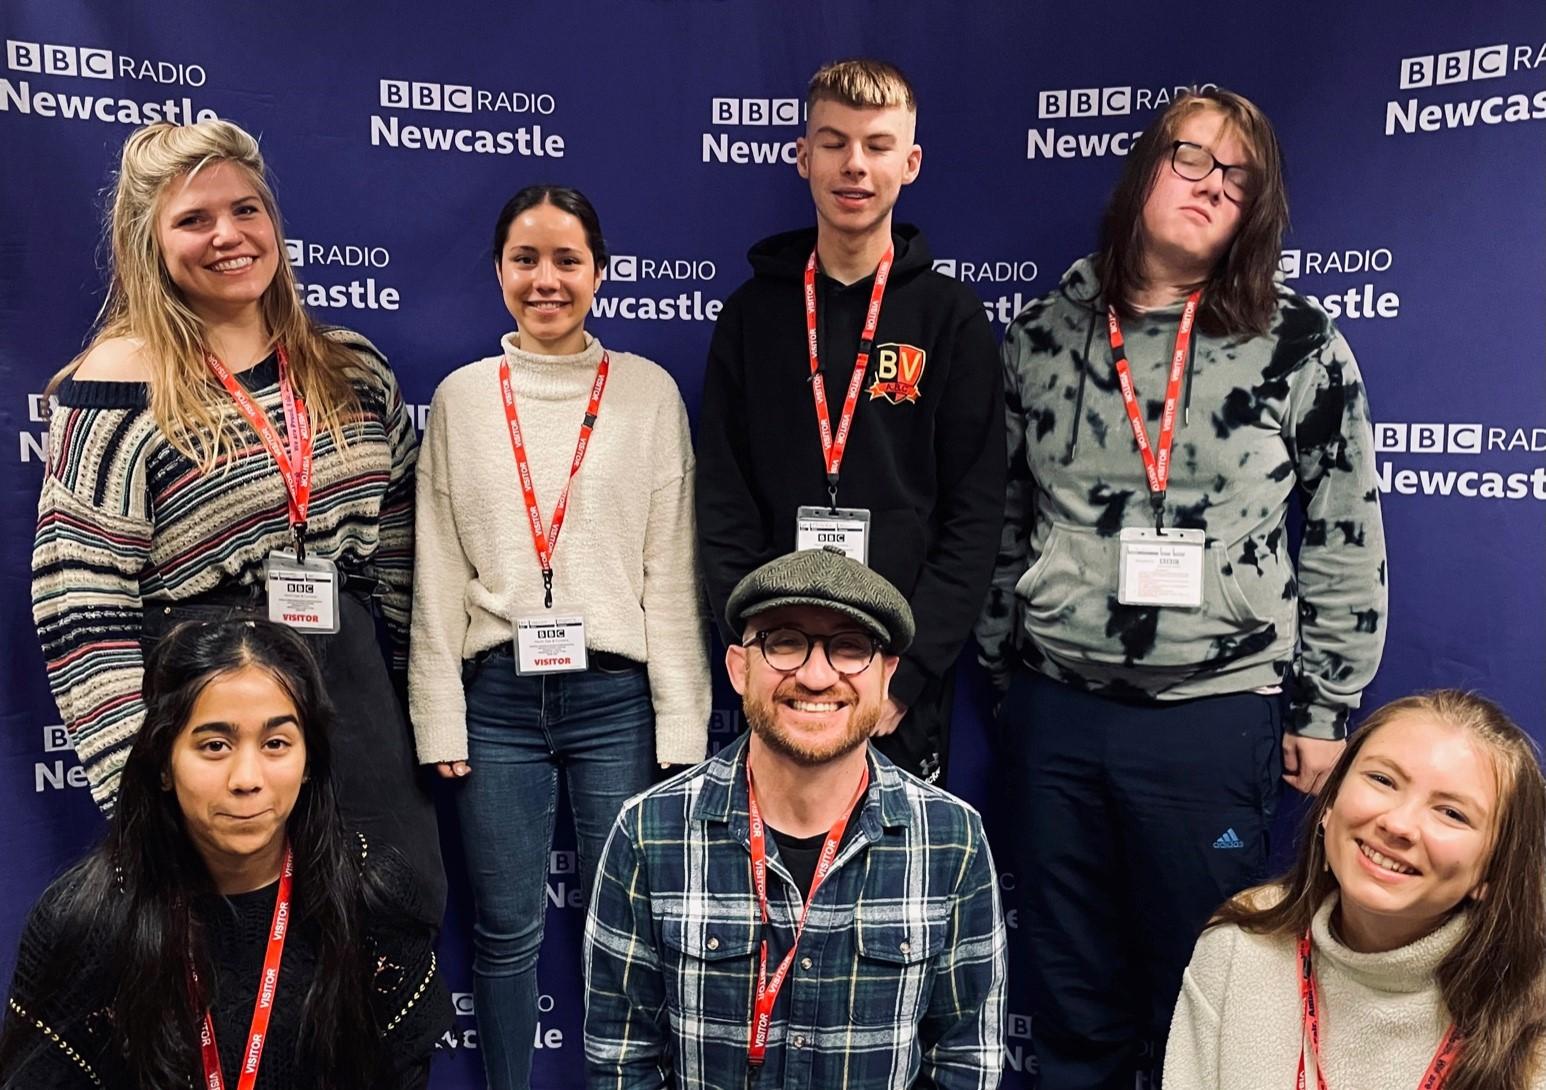 Young people joined BBC Radio Newcastle as part of the Takeover Challenge